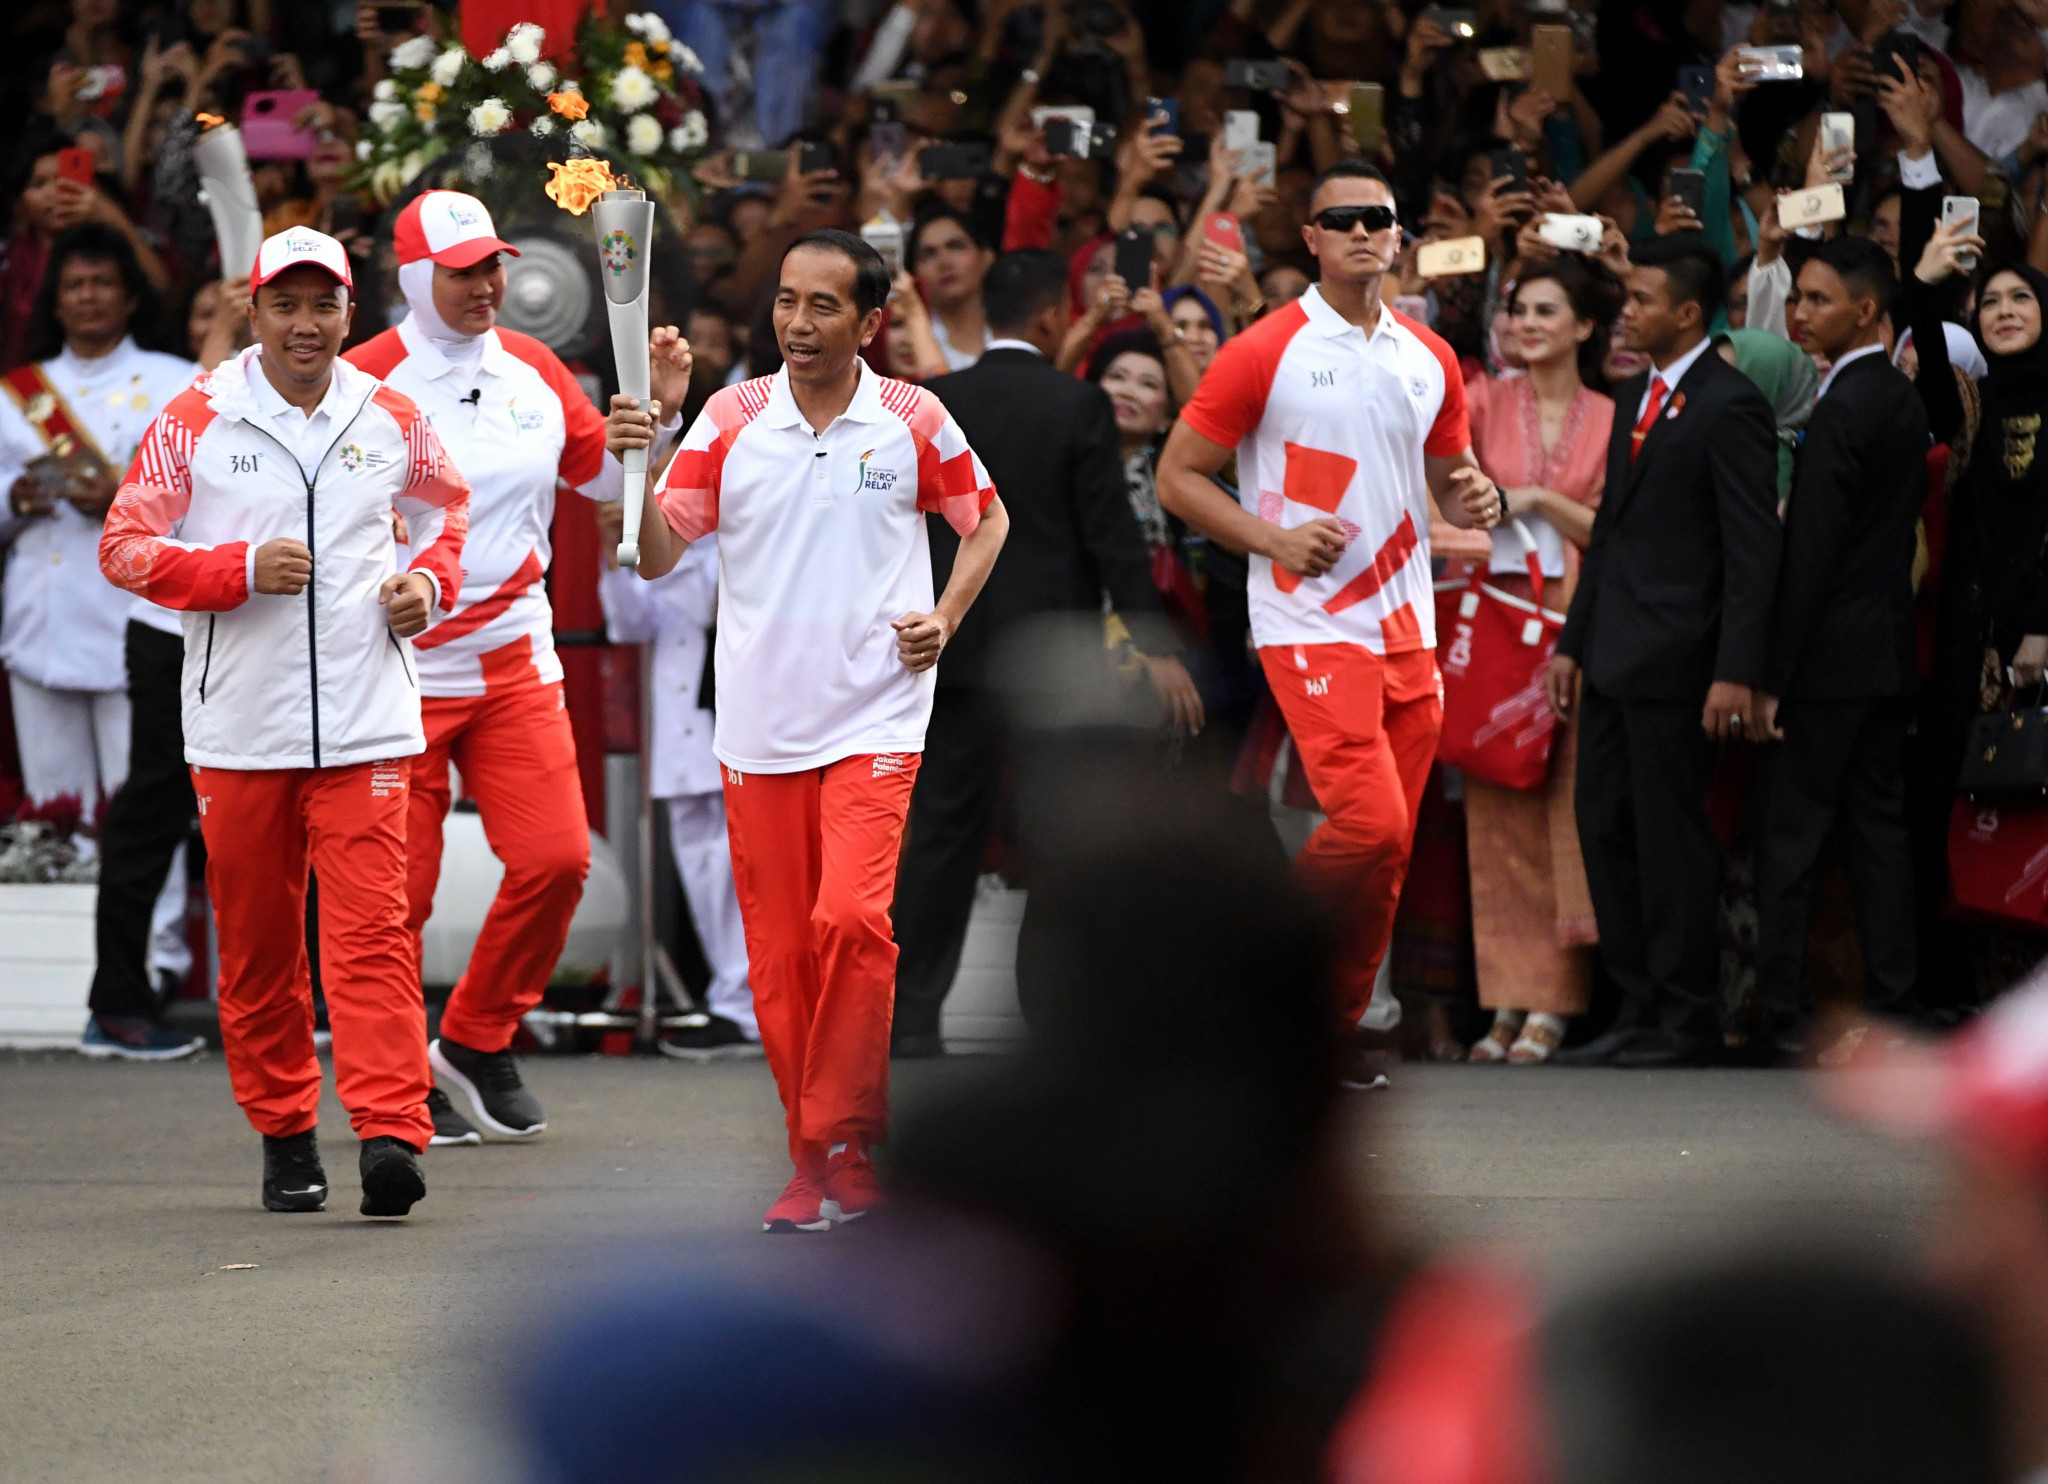 Indonesia President takes part in Torch Relay as countdown to 2018 Asian Games continues